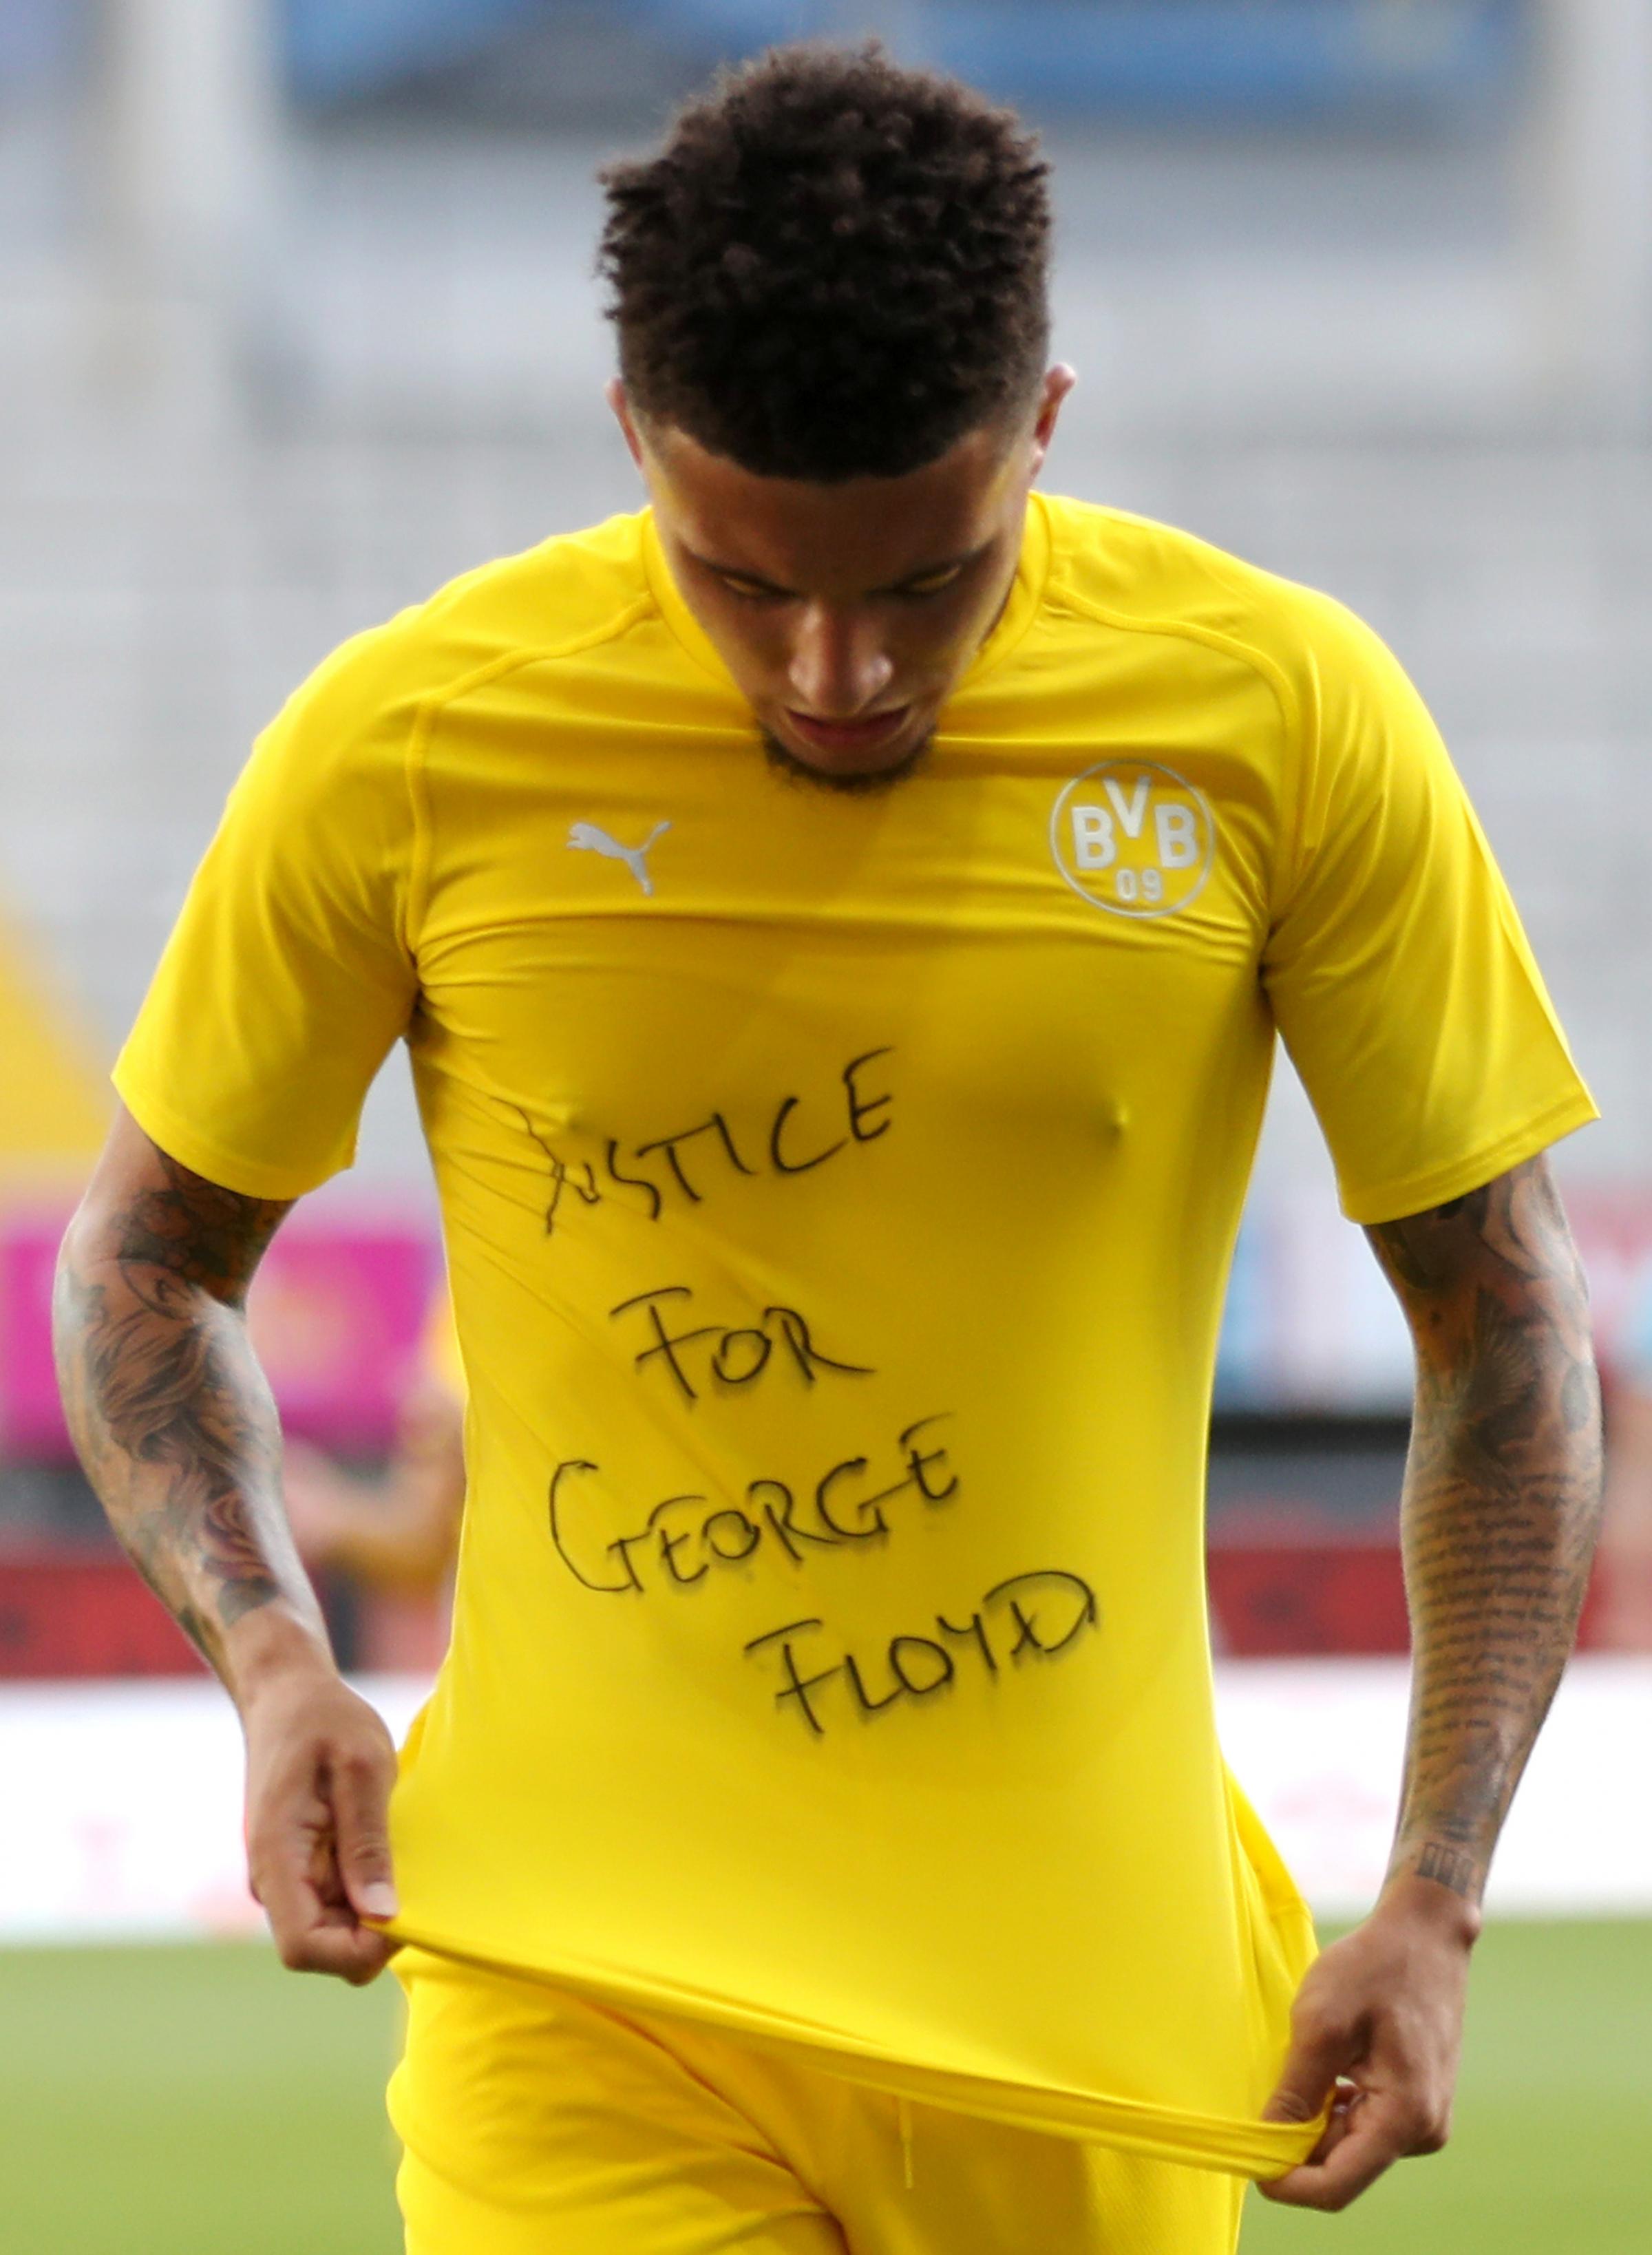 Ex-Watford and Manchester City youngster Jadon Sancho shows 'Justice for George Floyd' message